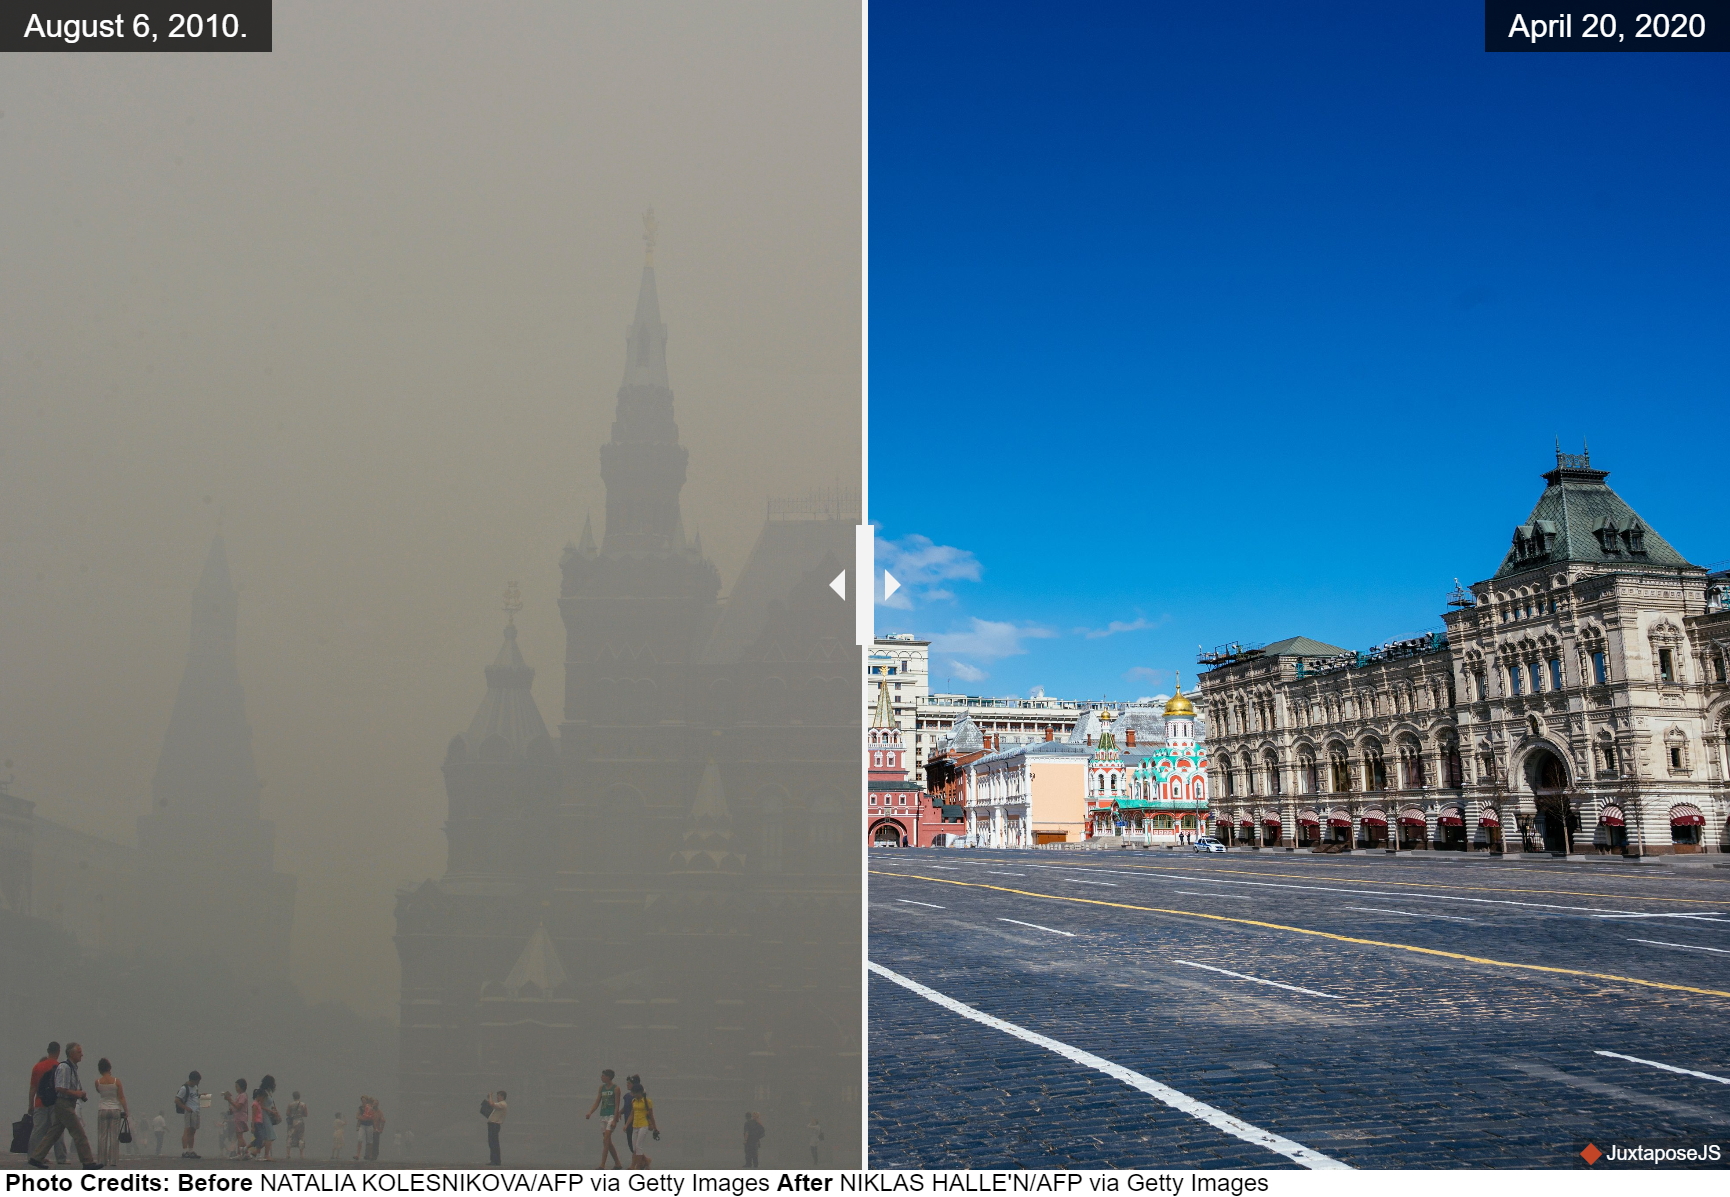 View of air pollution in Moscow, Russia on 6 August 2010 and 20 April 2020. Photo: Natalia Kolesnikova / Niklas Halle'n / AFP / Getty Images